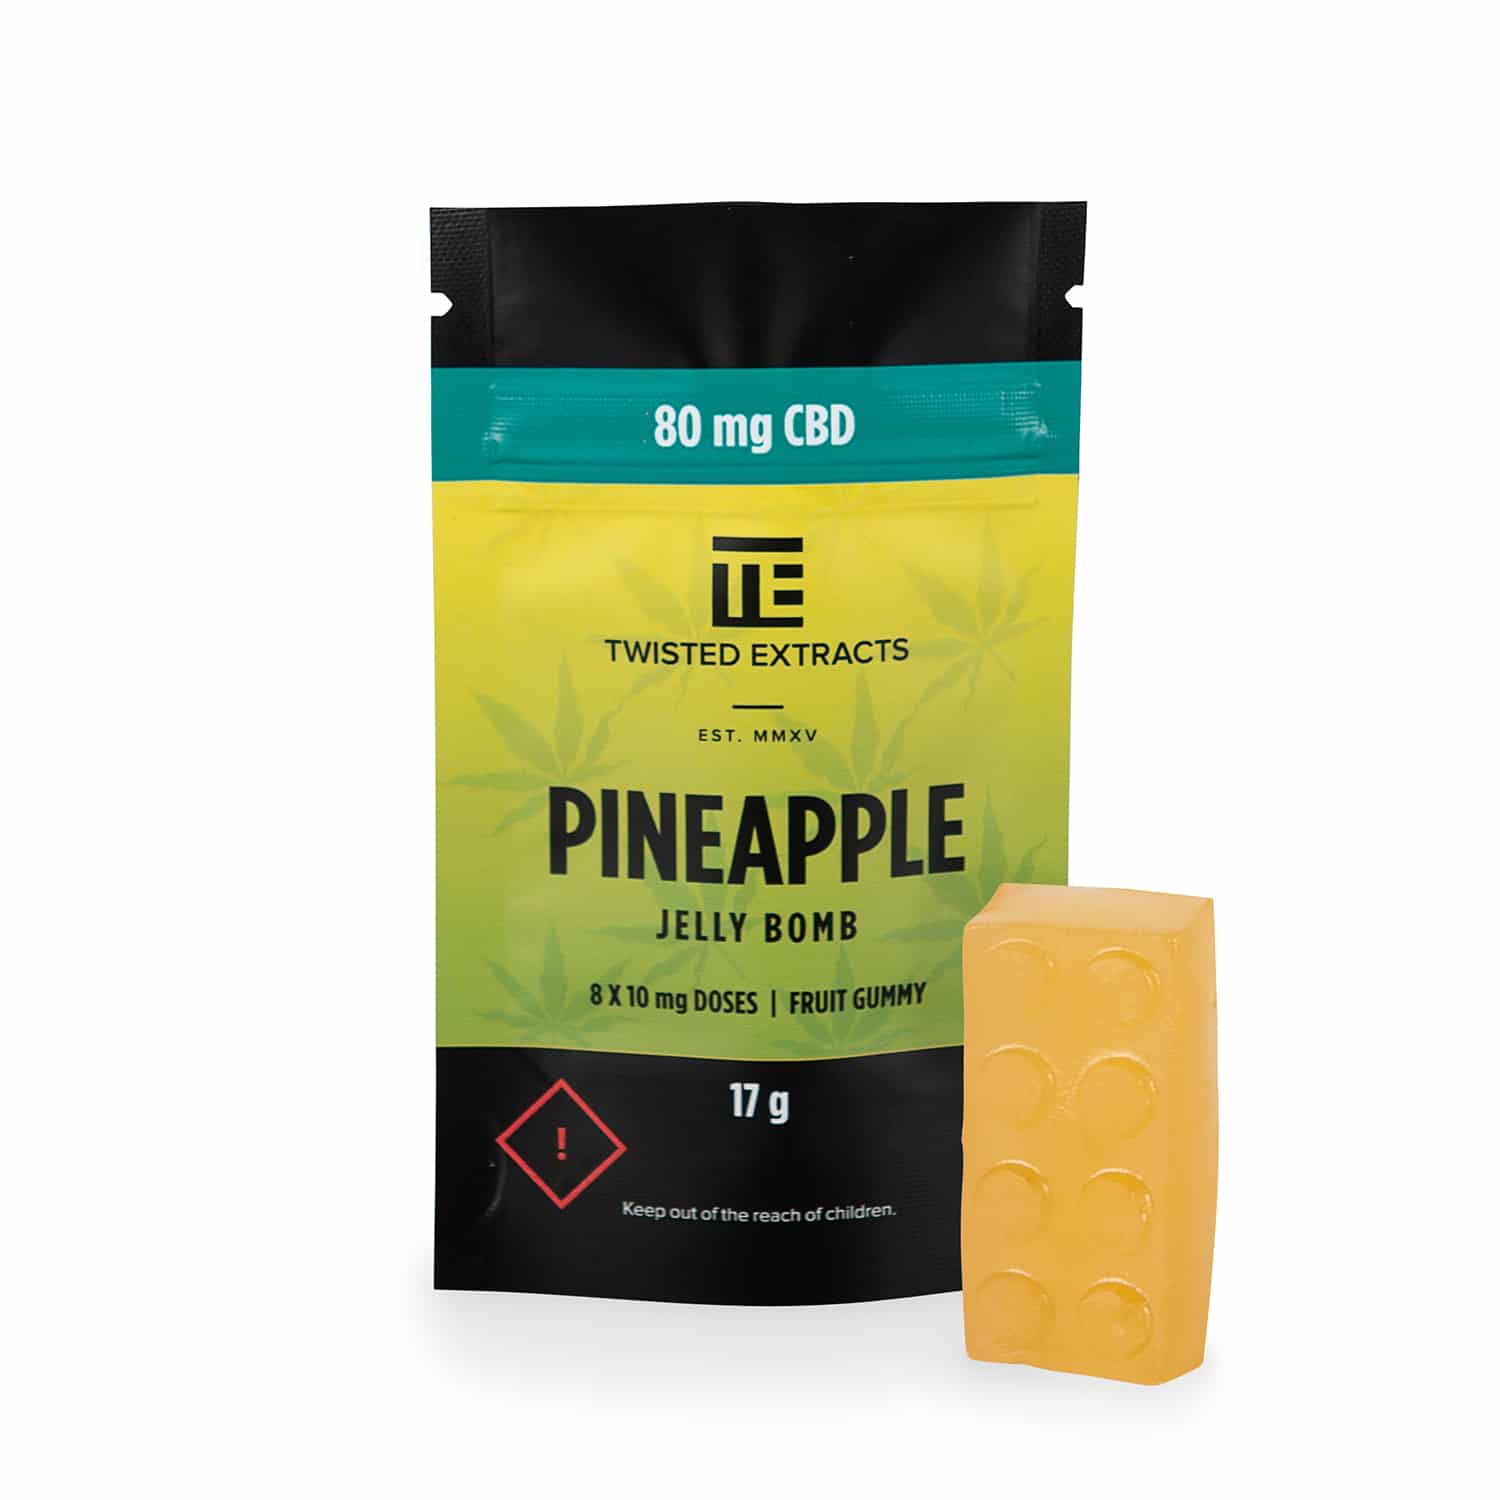 Twisted-extracts-pineapple-ganjawest-1.jpg